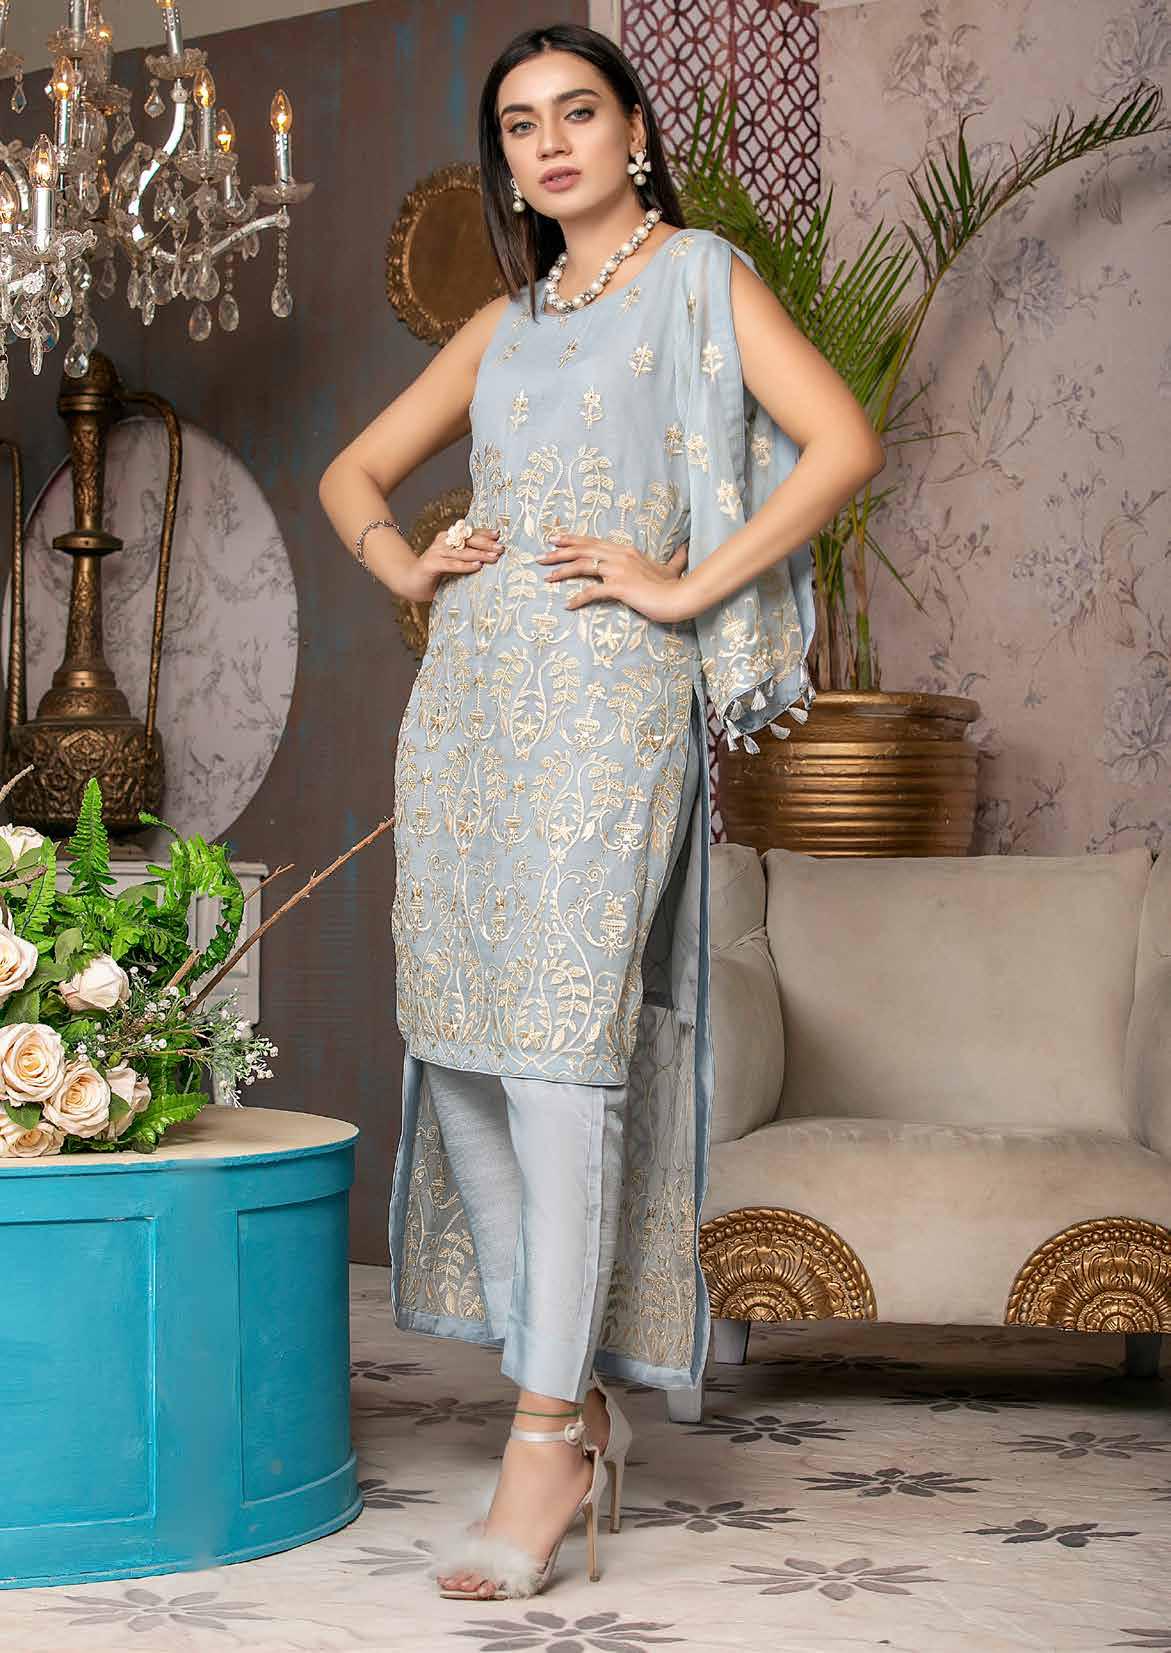 Designer Long Green Chiffon Bhandej Printed Kurta With Pants and Dupatta,  Ready to Wear Festive Salwar Kameez, Plus Size Clothing for Girls - Etsy |  Occasion wear dresses, Plus size outfits, Chiffon fabric